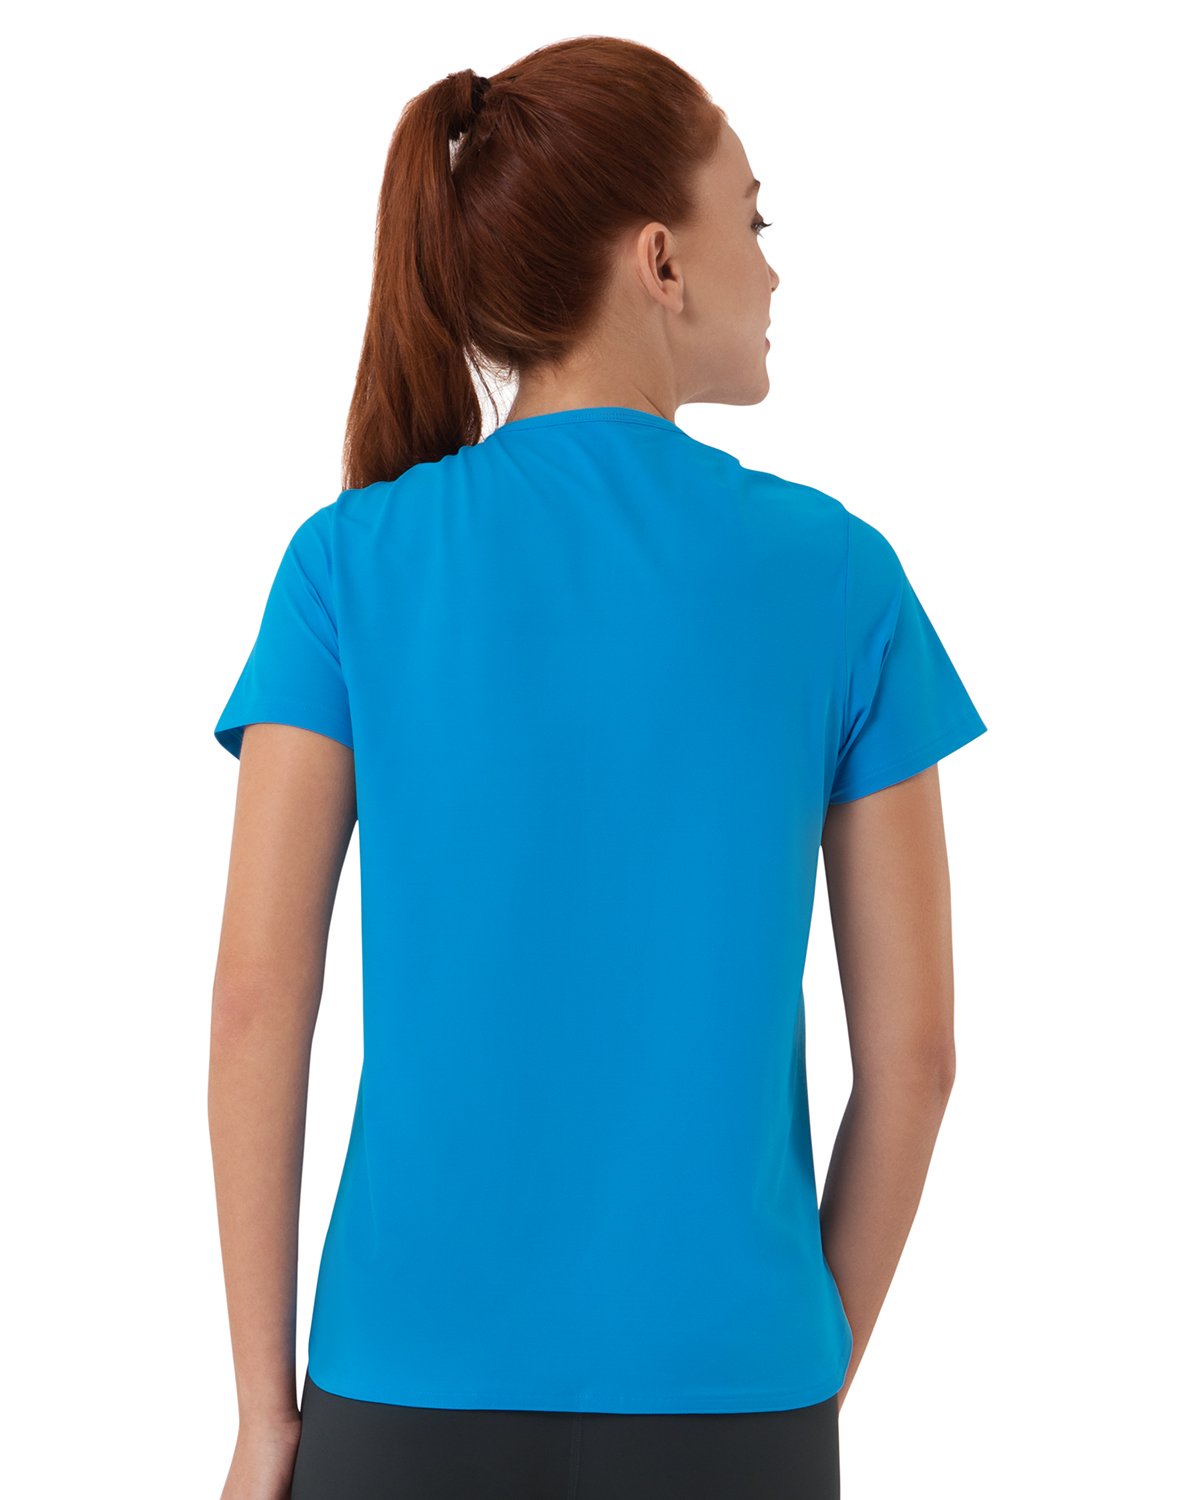 Smooth and Seamless Fitness T-shirt - Diva Blue